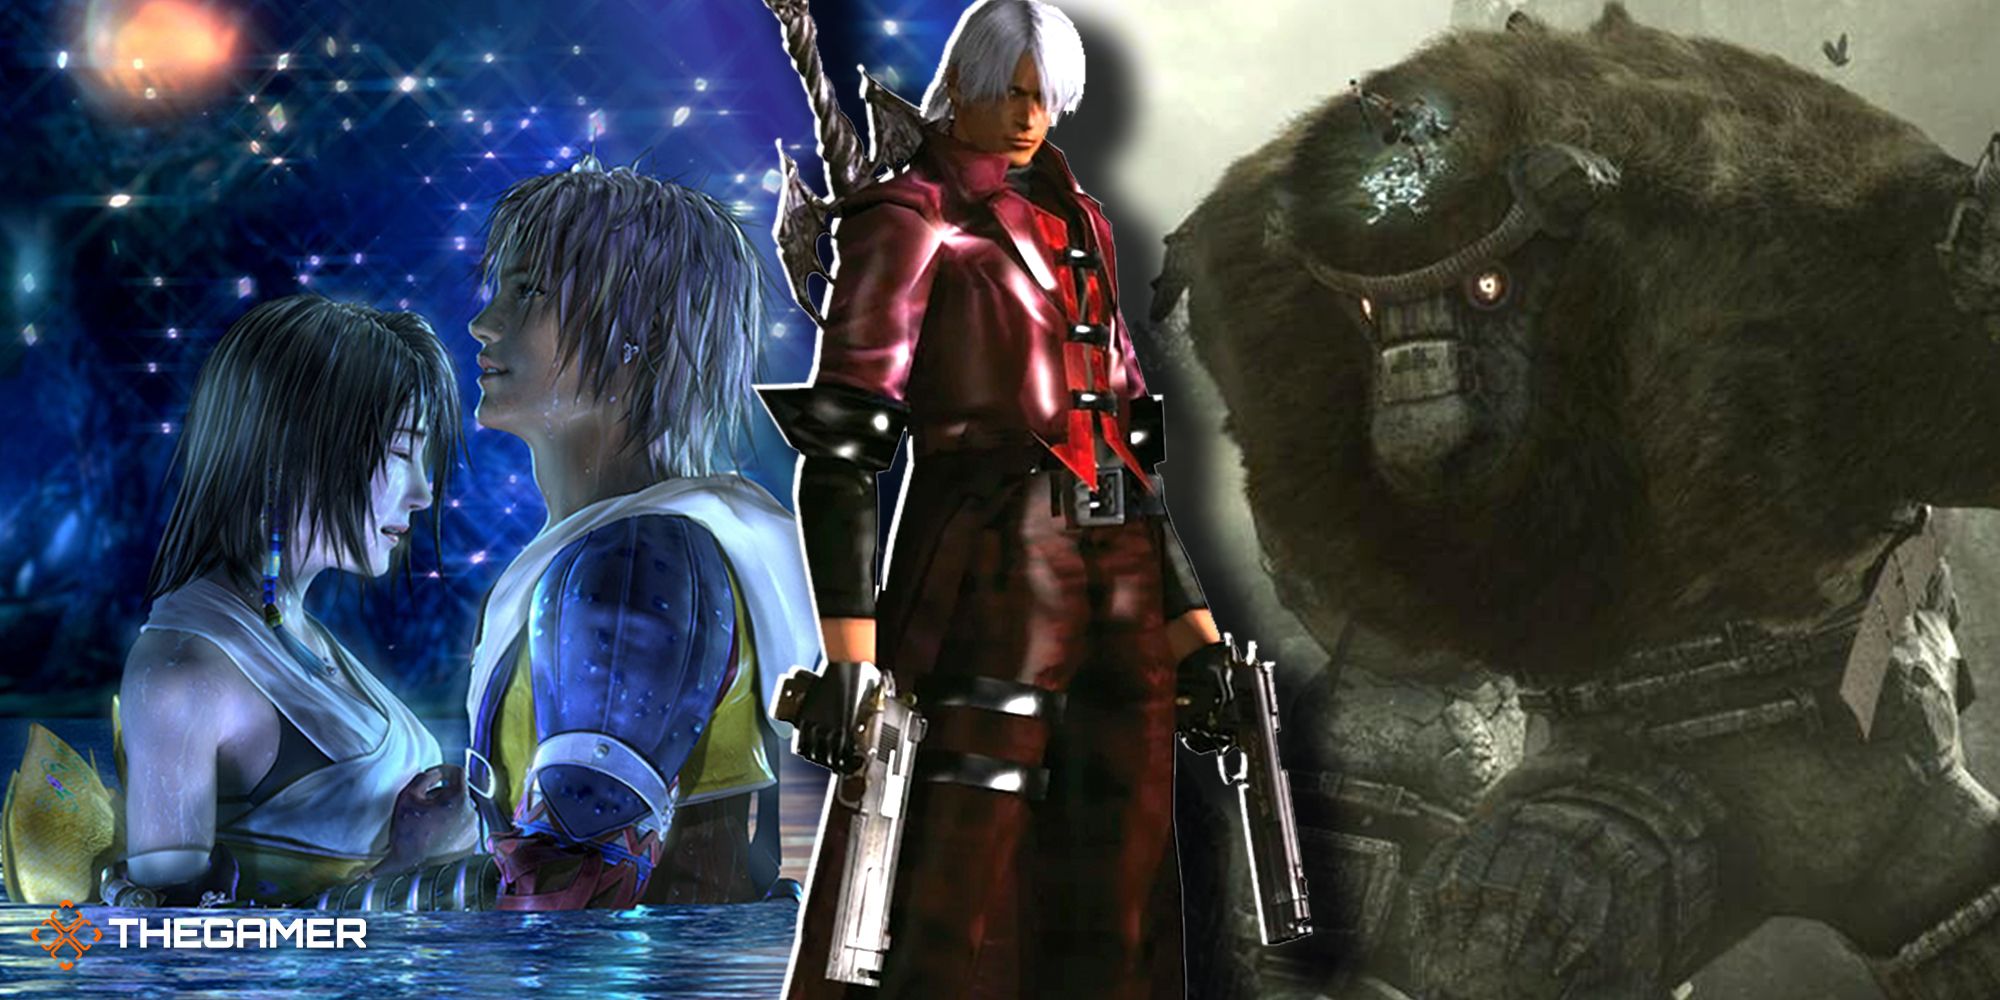 Game art from Shadow Of The Colossus, Final Fantasy X and Devil May Cry.